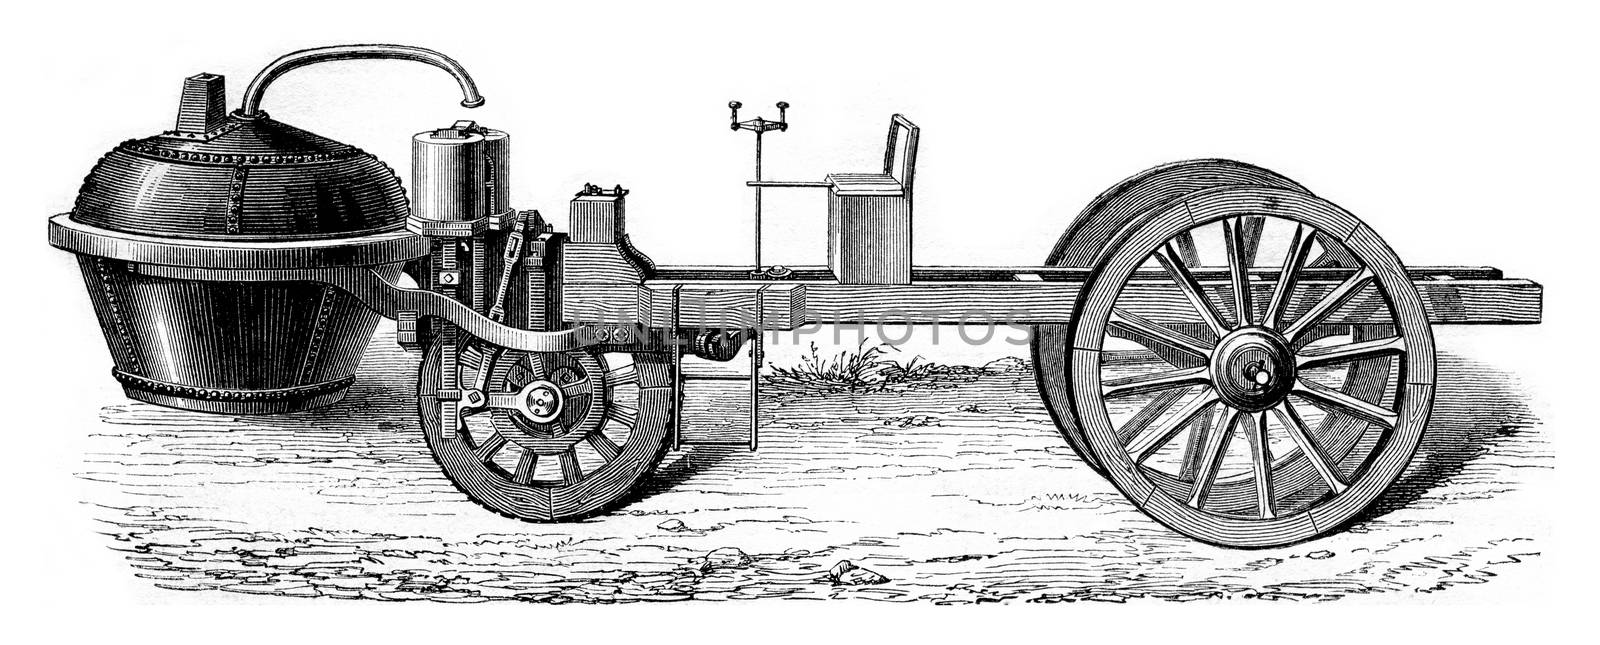 Steam car of Cugnot under Louis XV, vintage engraved illustration. Magasin Pittoresque 1861.
